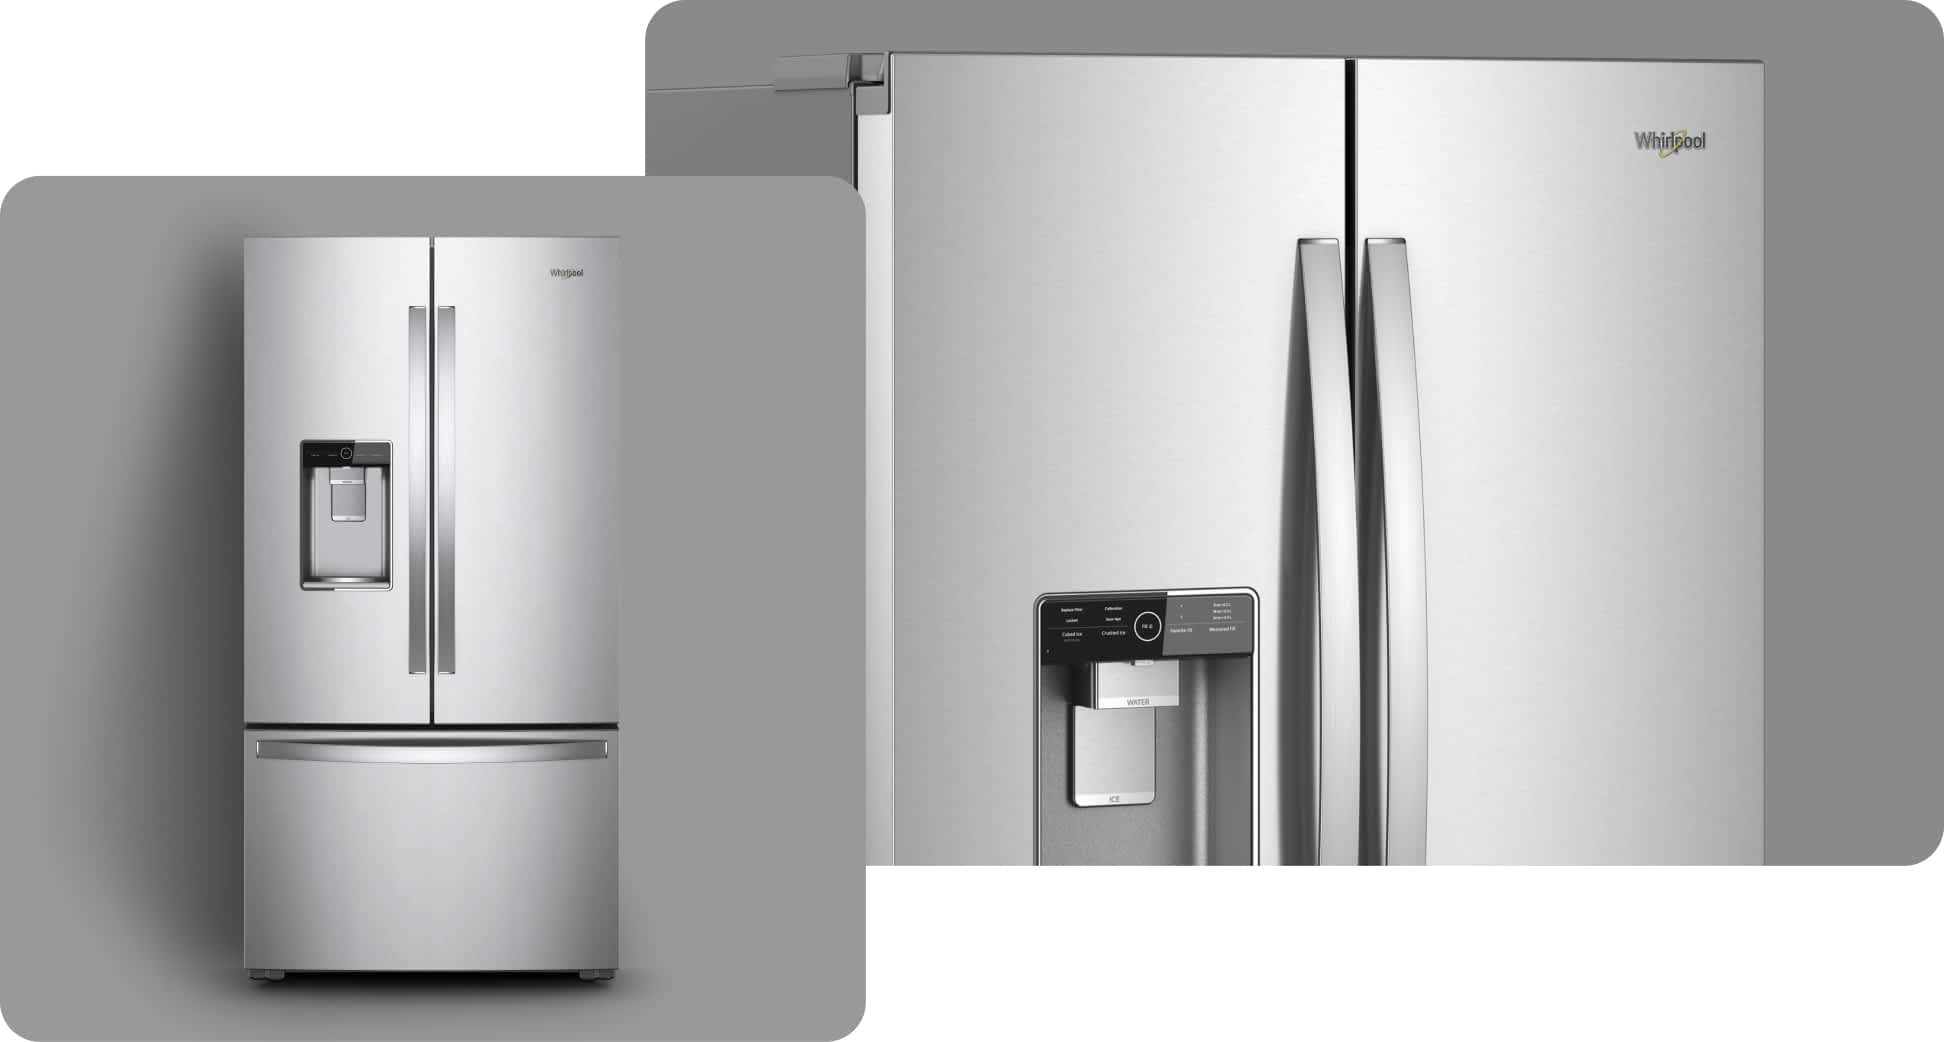 A Whirlpool® Refrigerator with a Fingerprint-Resistant Stainless Finish